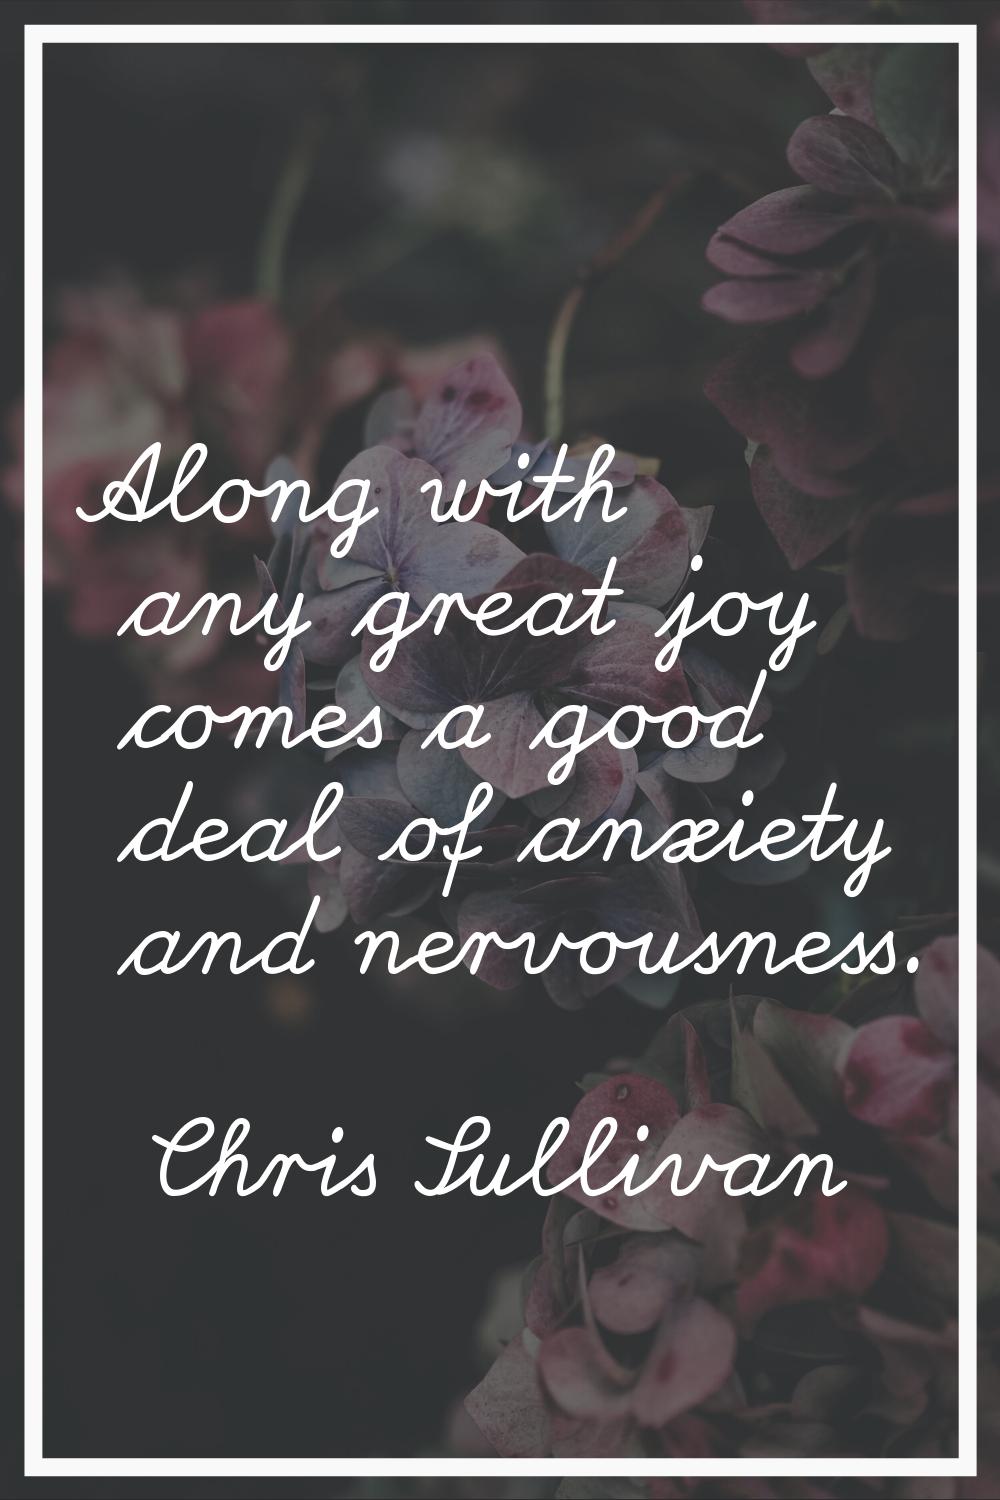 Along with any great joy comes a good deal of anxiety and nervousness.